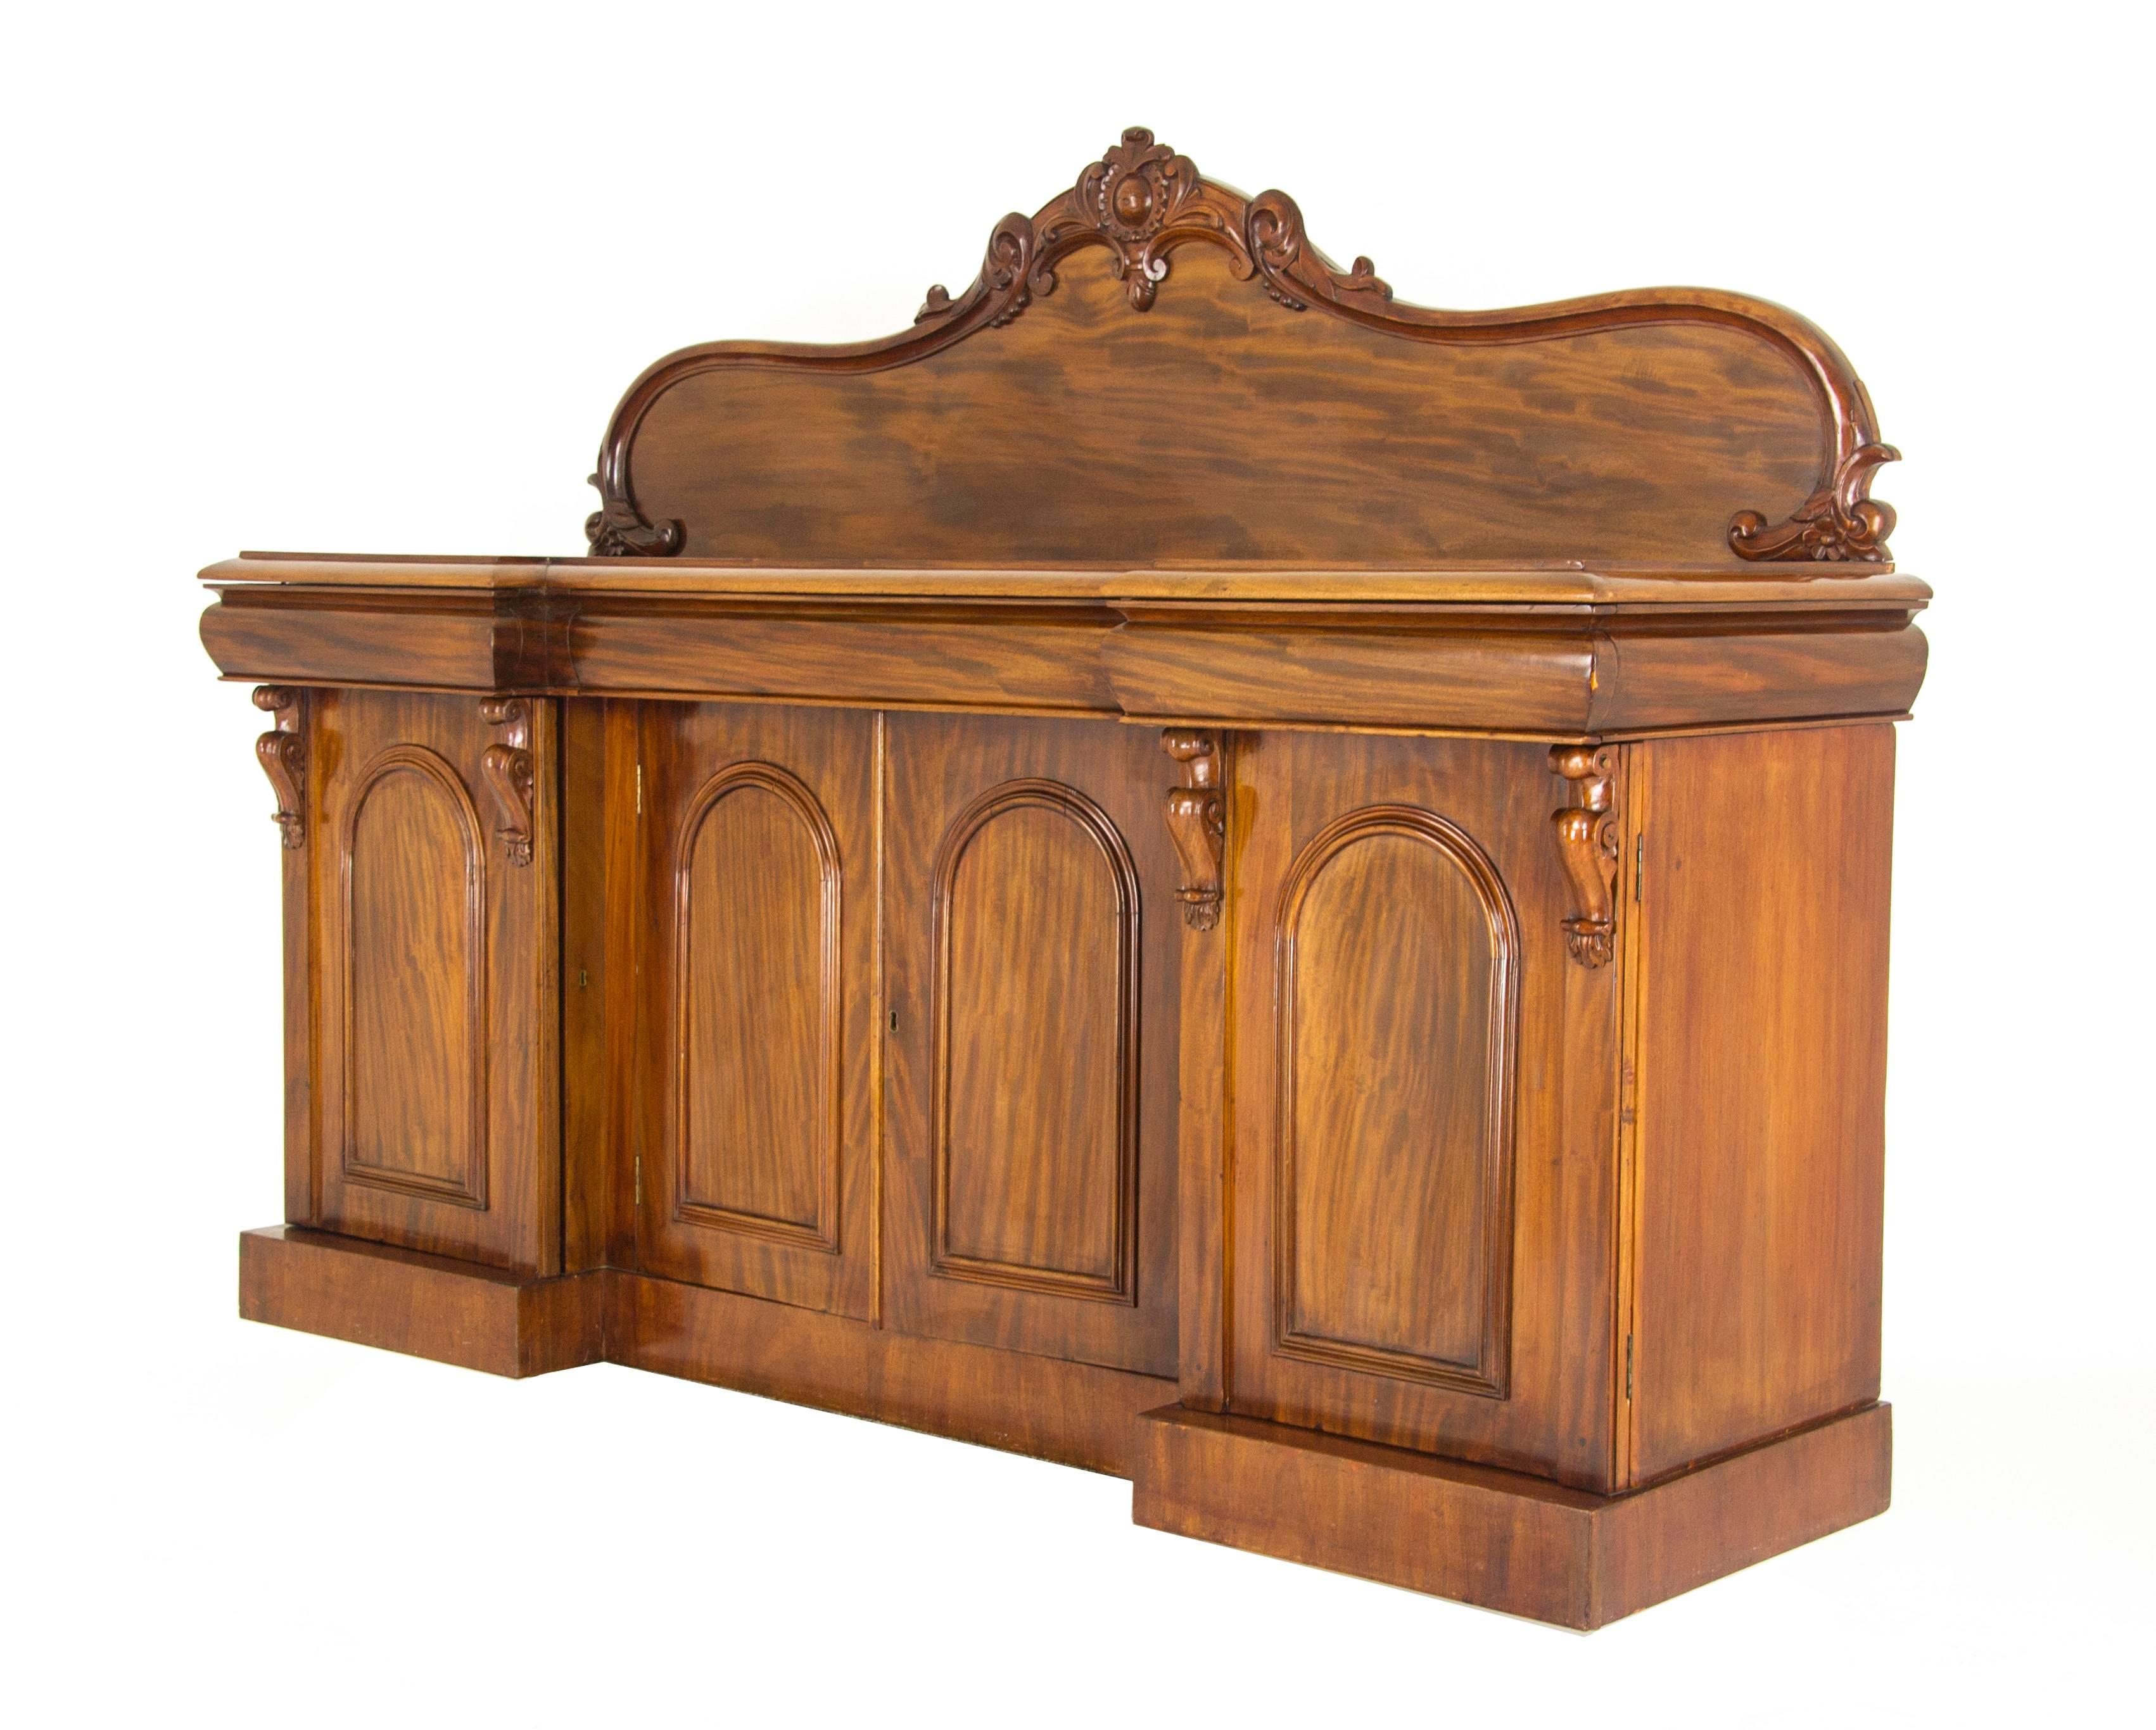 Scottish Antique Mahogany Vintage Sideboard Carved Buffet Four-Door Chiffonier, Scotland